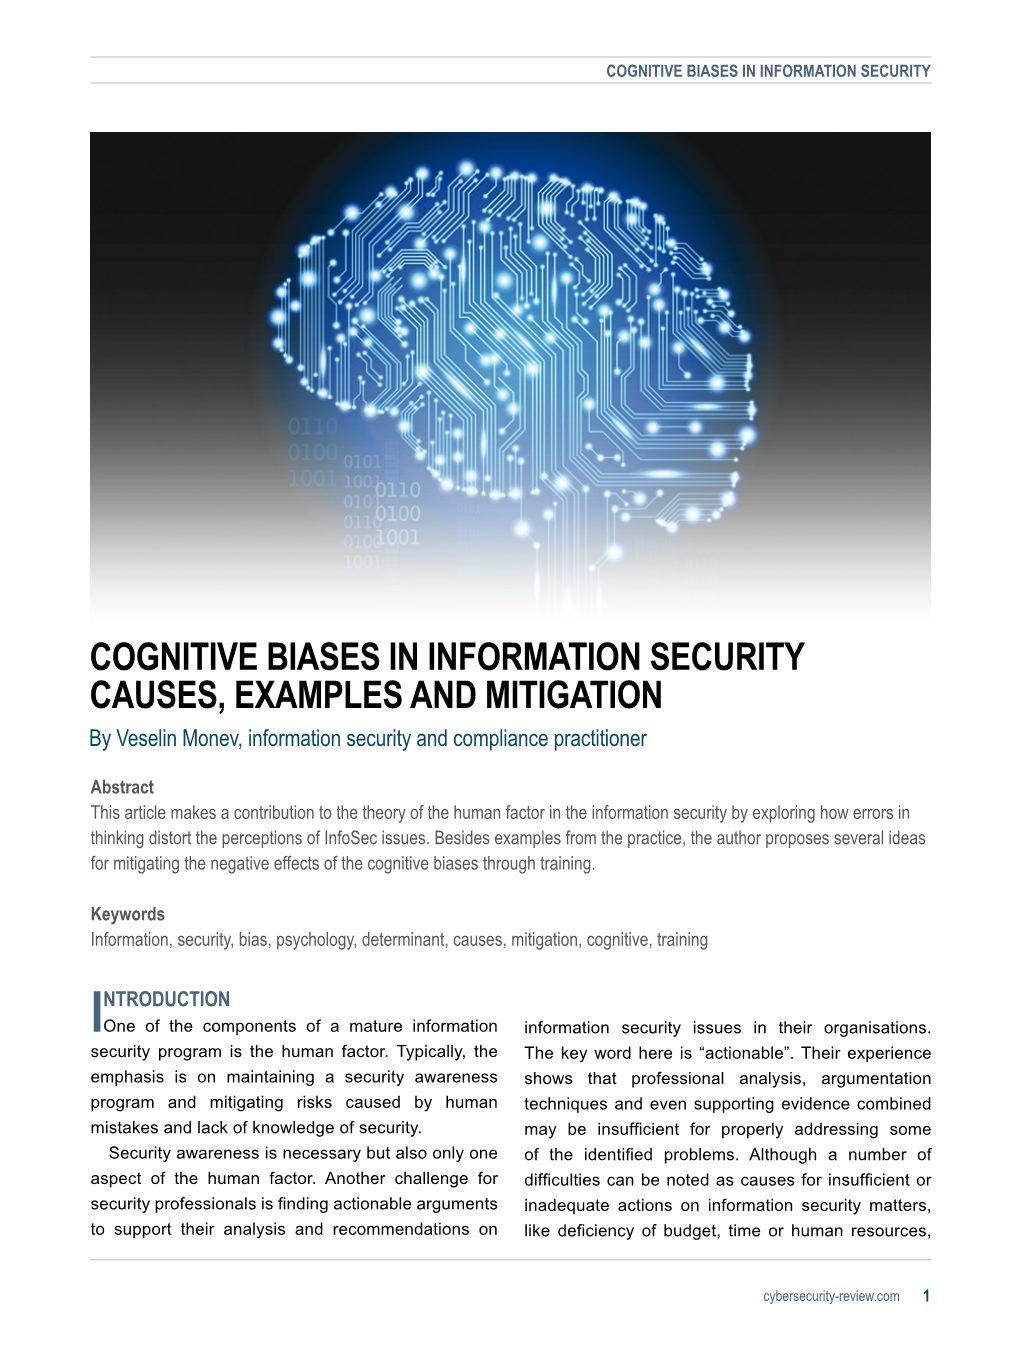 COGNITIVE BIASES in INFORMATION SECURITY CAUSES, EXAMPLES and MITIGATION by Veselin Monev, Information Security and Compliance Practitioner